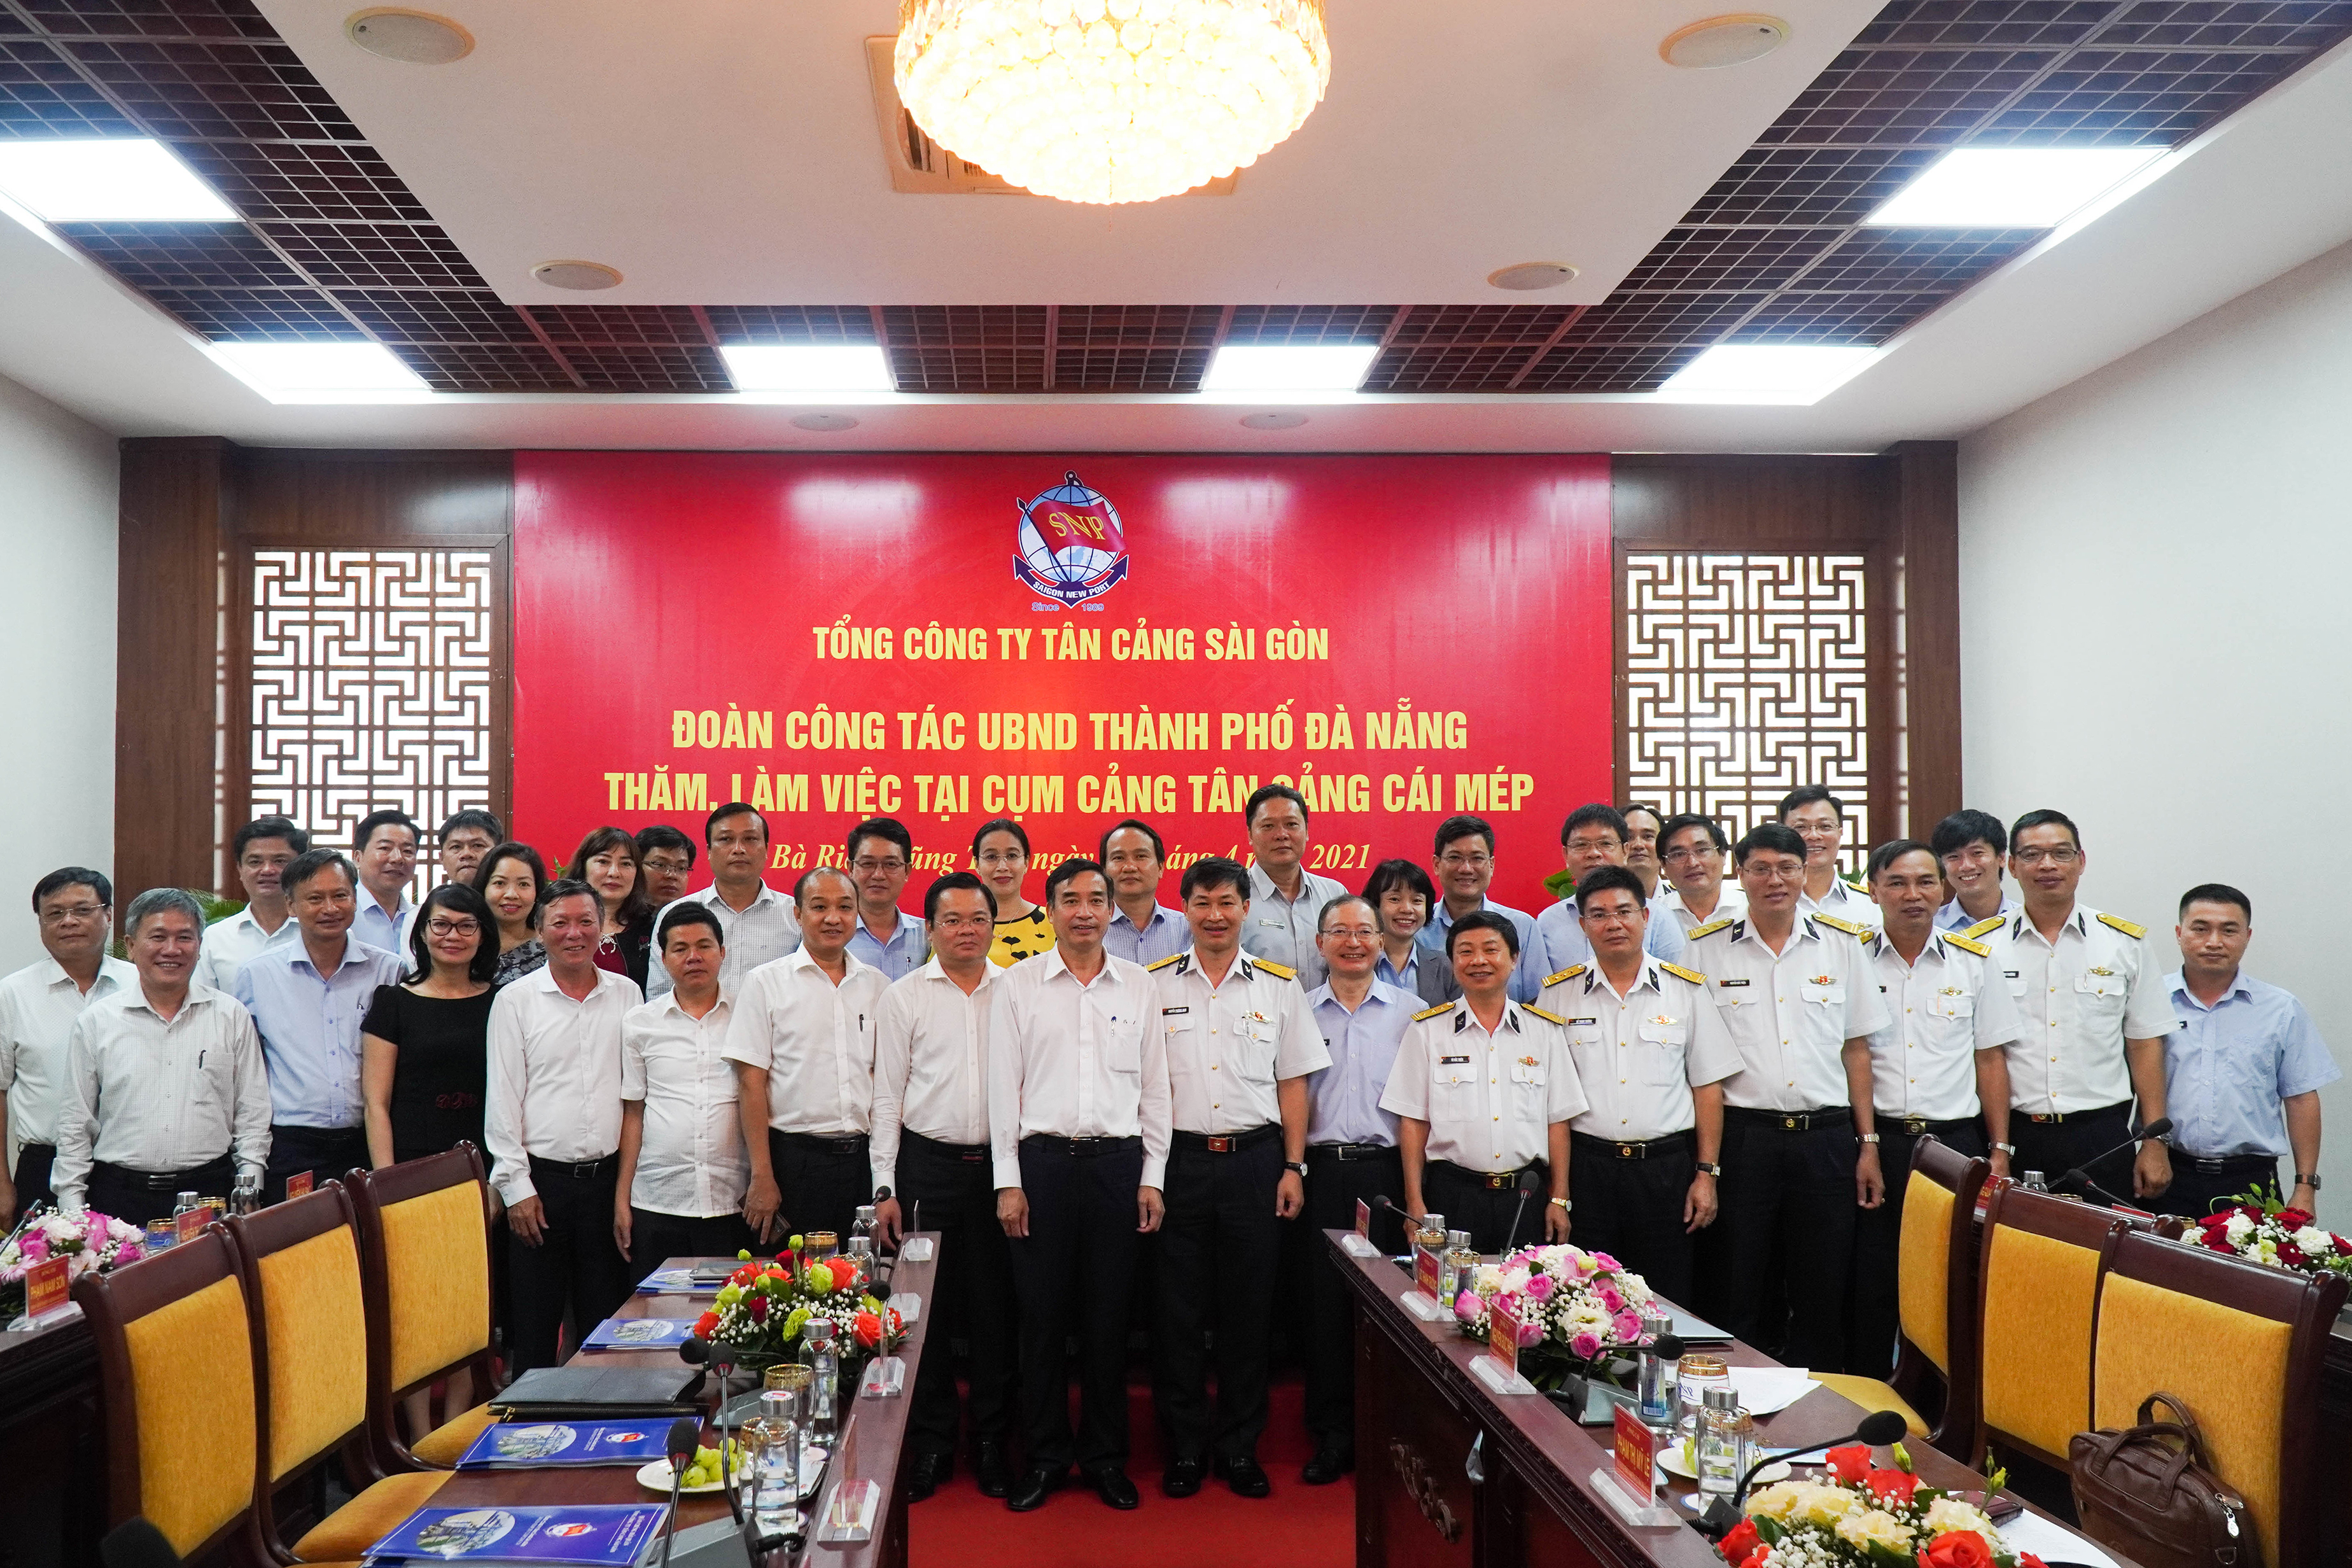 TCIT WELCOMES THE DELEGATION OF DA NANG CITY PEOPLE'S COMMITTEE TO VISIT AND WORK.